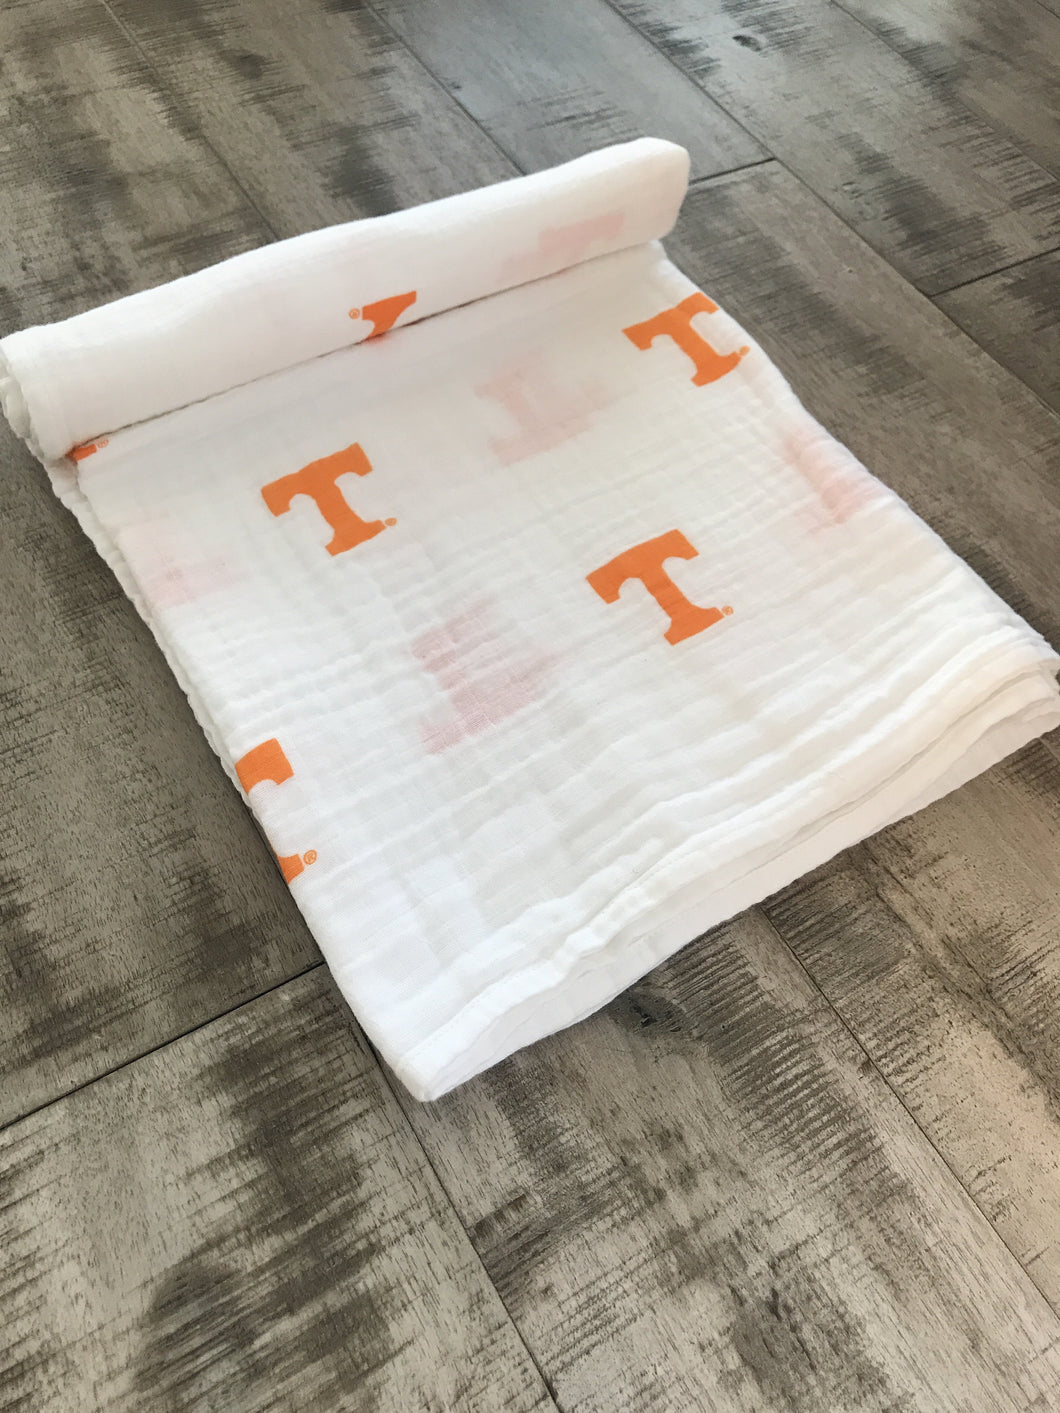 The University of Tennessee Swaddle Blanket